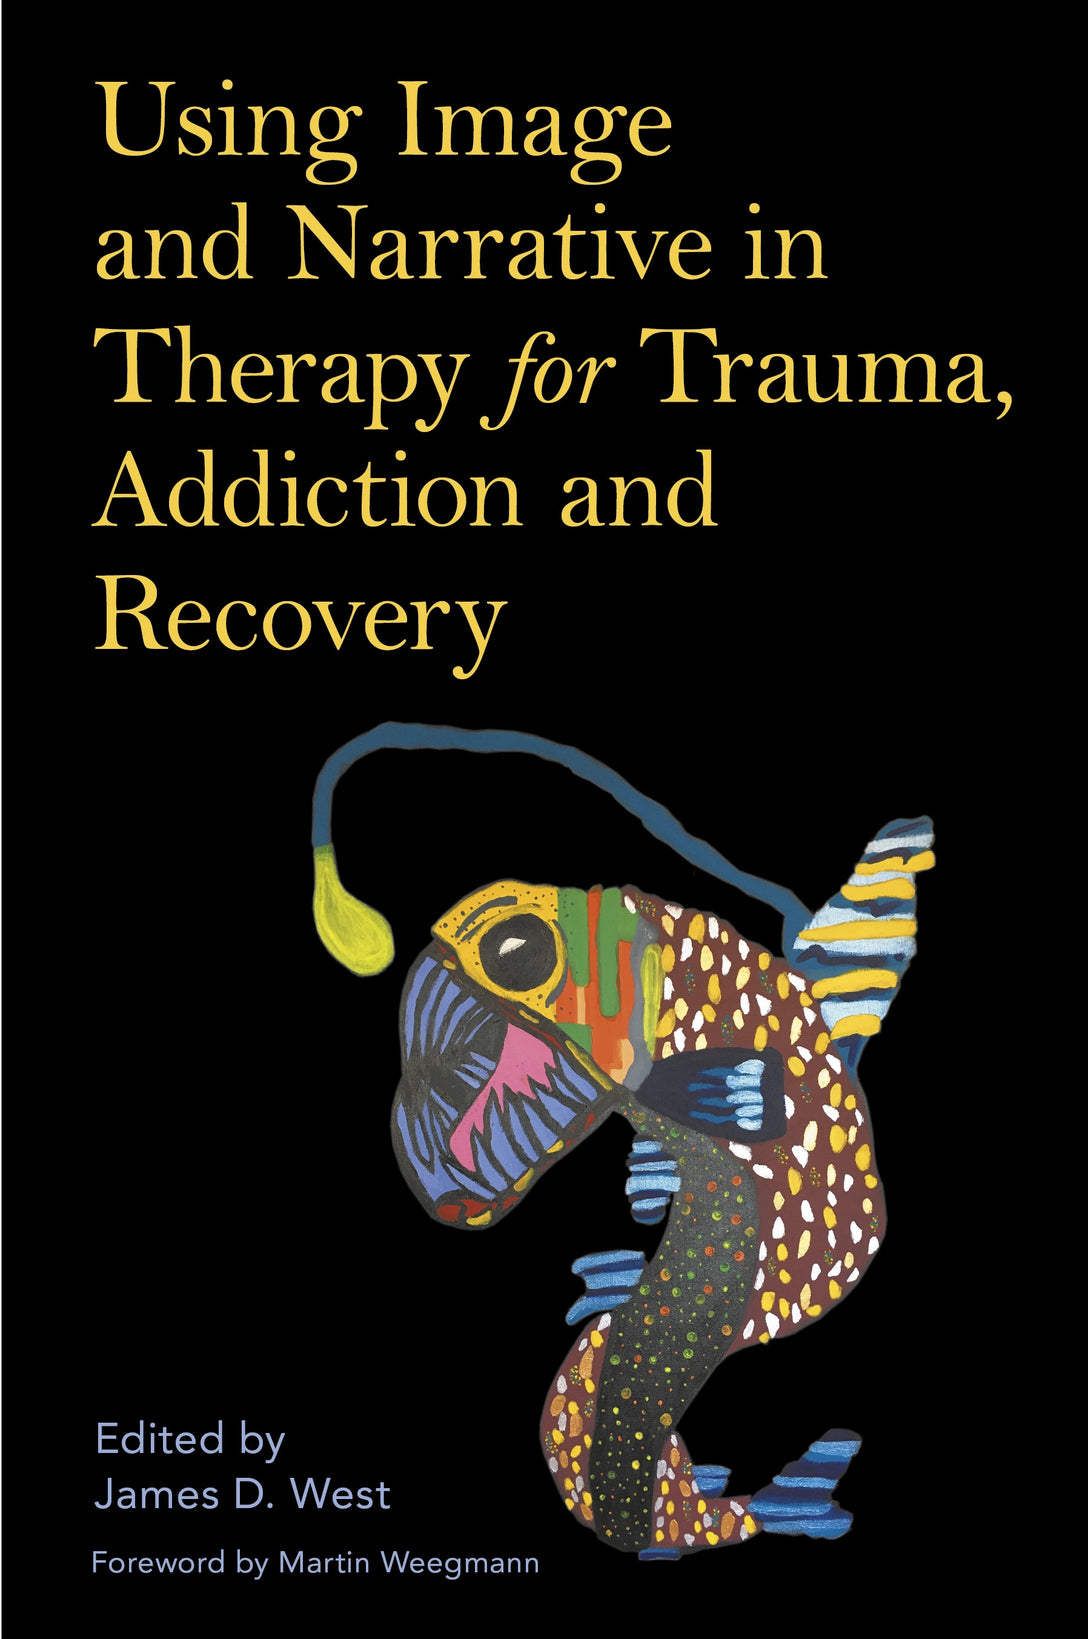 Using Image and Narrative in Therapy for Trauma, Addiction and Recovery by James West, Martin Weegmann, No Author Listed